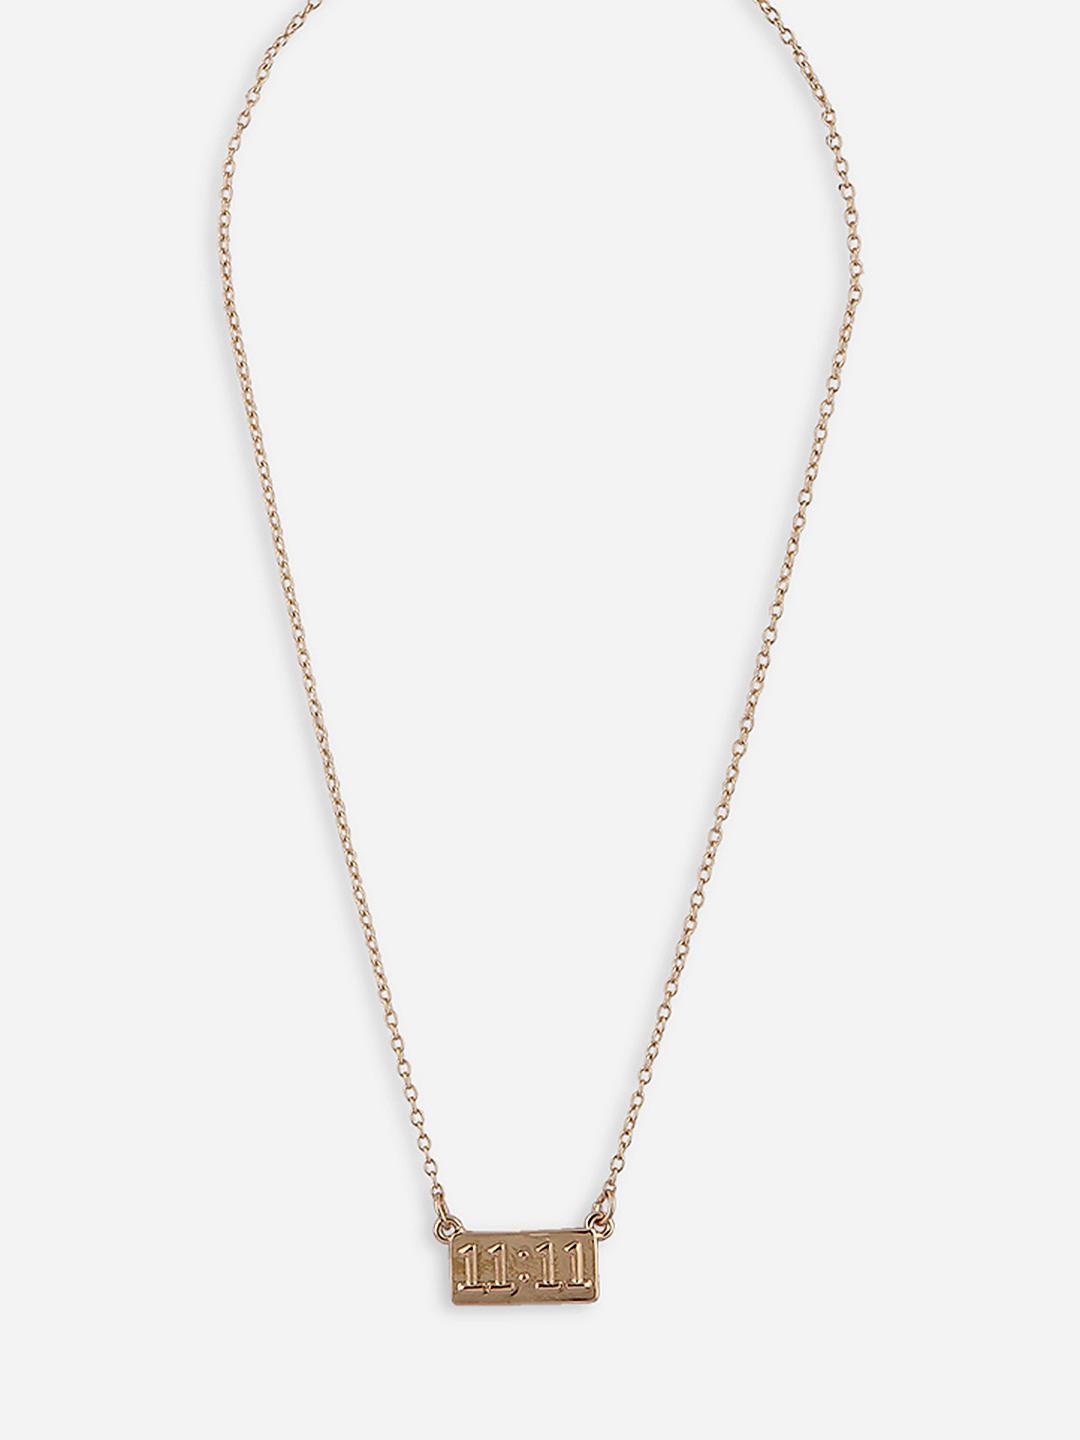 11:11 Angel Number Necklace ∙ 18k Gold – theurbanattic